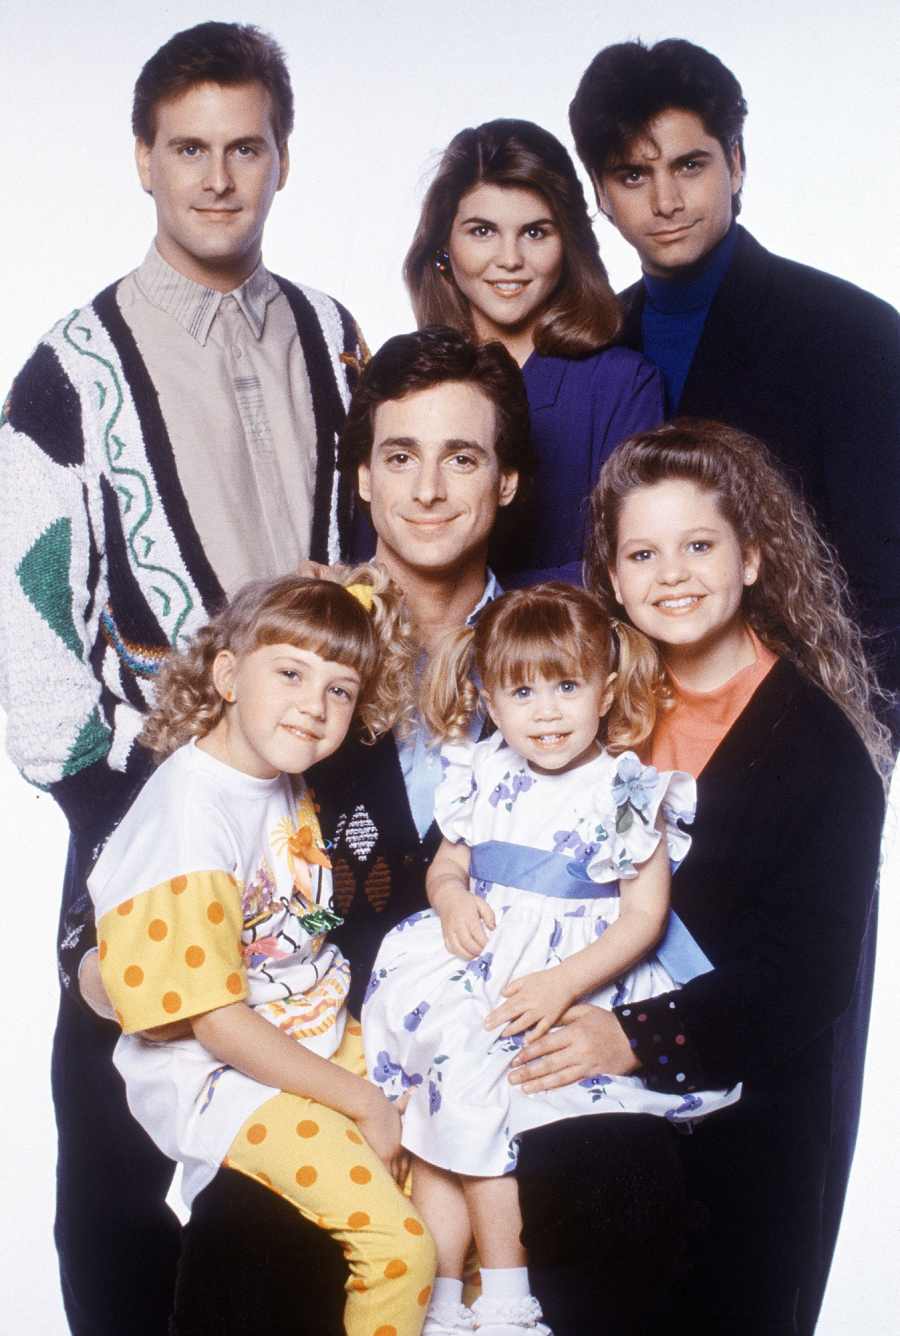 Full House Begins 1988 Lori Loughlin Through the Years: 'Full House,' College Scandal and More